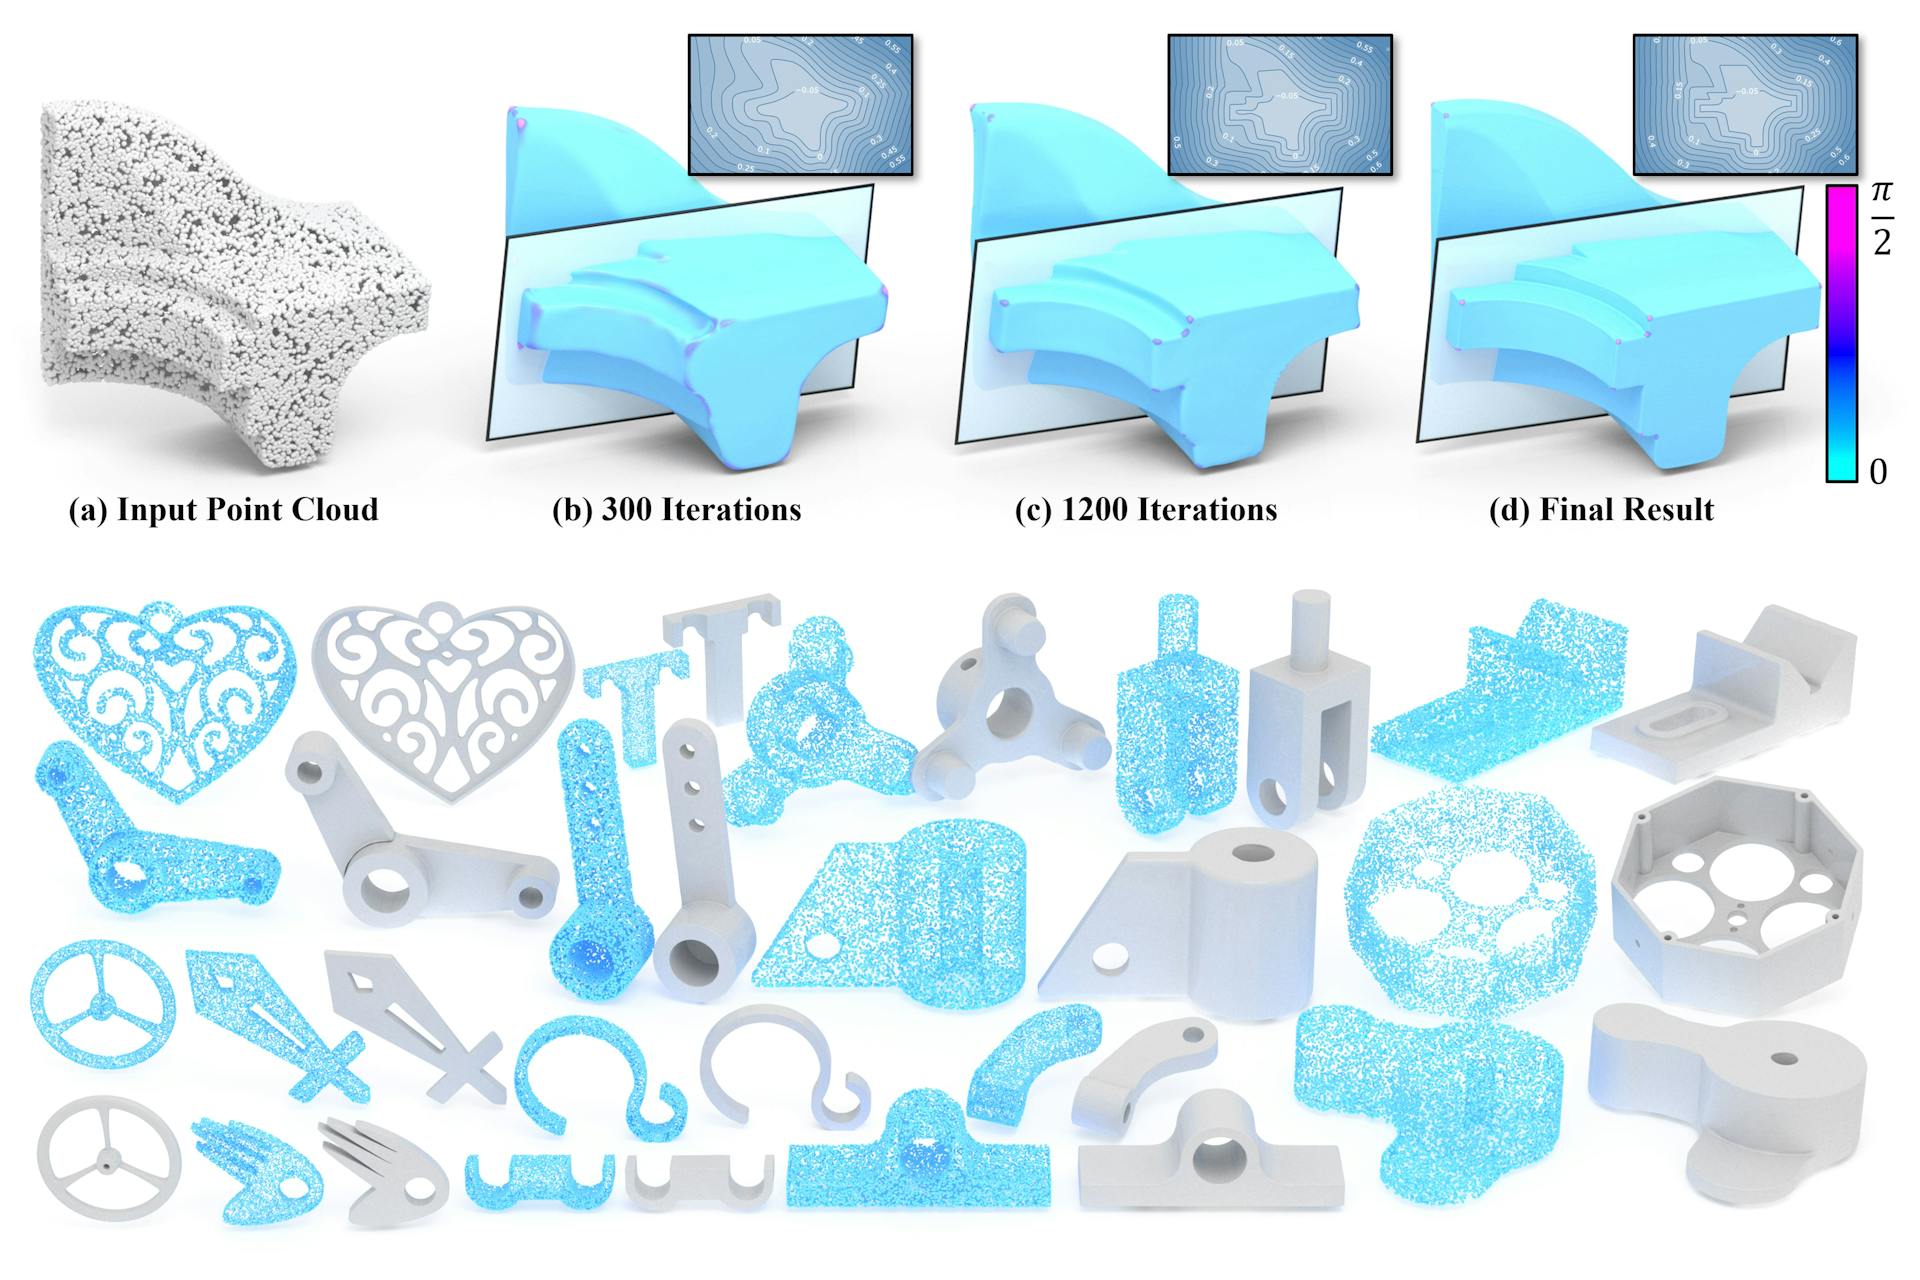 NeurCADRecon: Neural Representation for Reconstructing CAD Surfaces by Enforcing Zero Gaussian Curvature